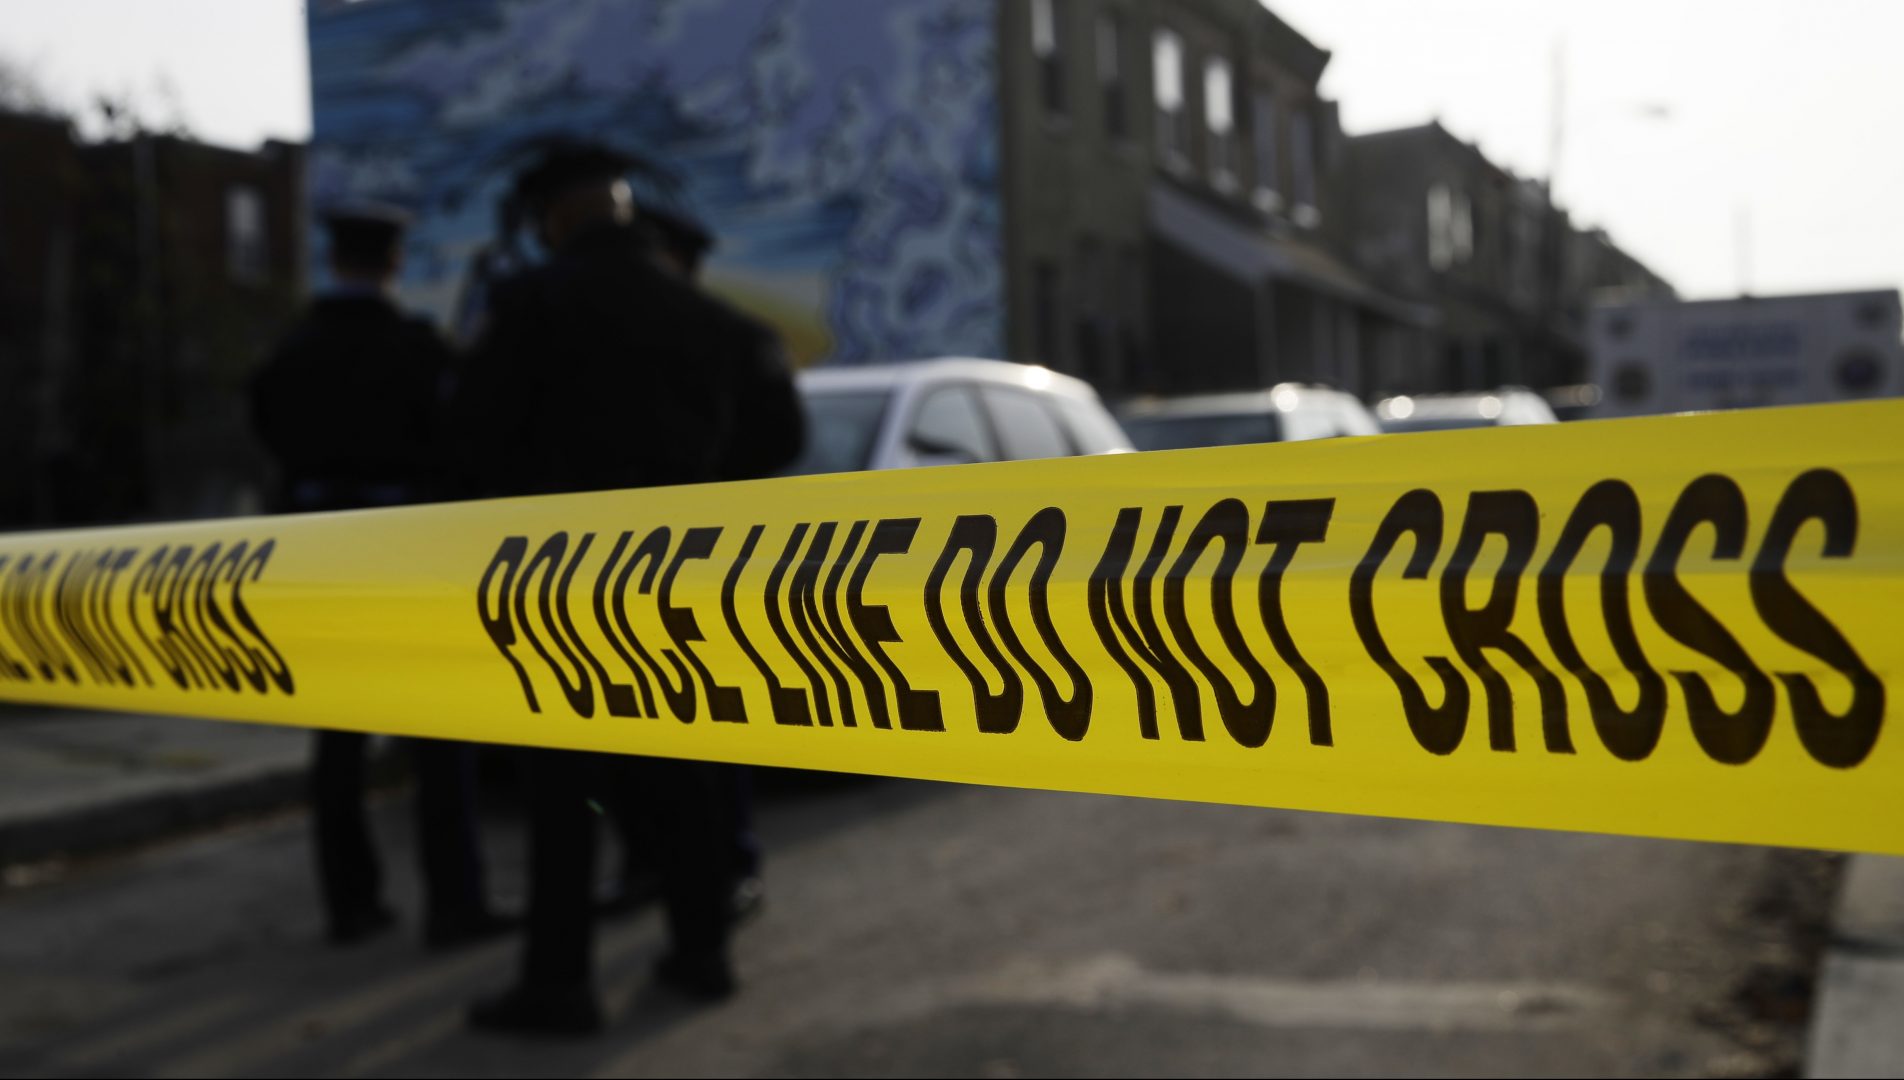 FILE PHOTO: In this Nov. 19, 2018, file photo, police gather at the scene of a quadruple fatal shooting in Philadelphia. Philadelphia's homicide rate is the highest in over a decade, as a particularly violent summer morphed into a deadly fall and the mayor declared gun violence a public health emergency.